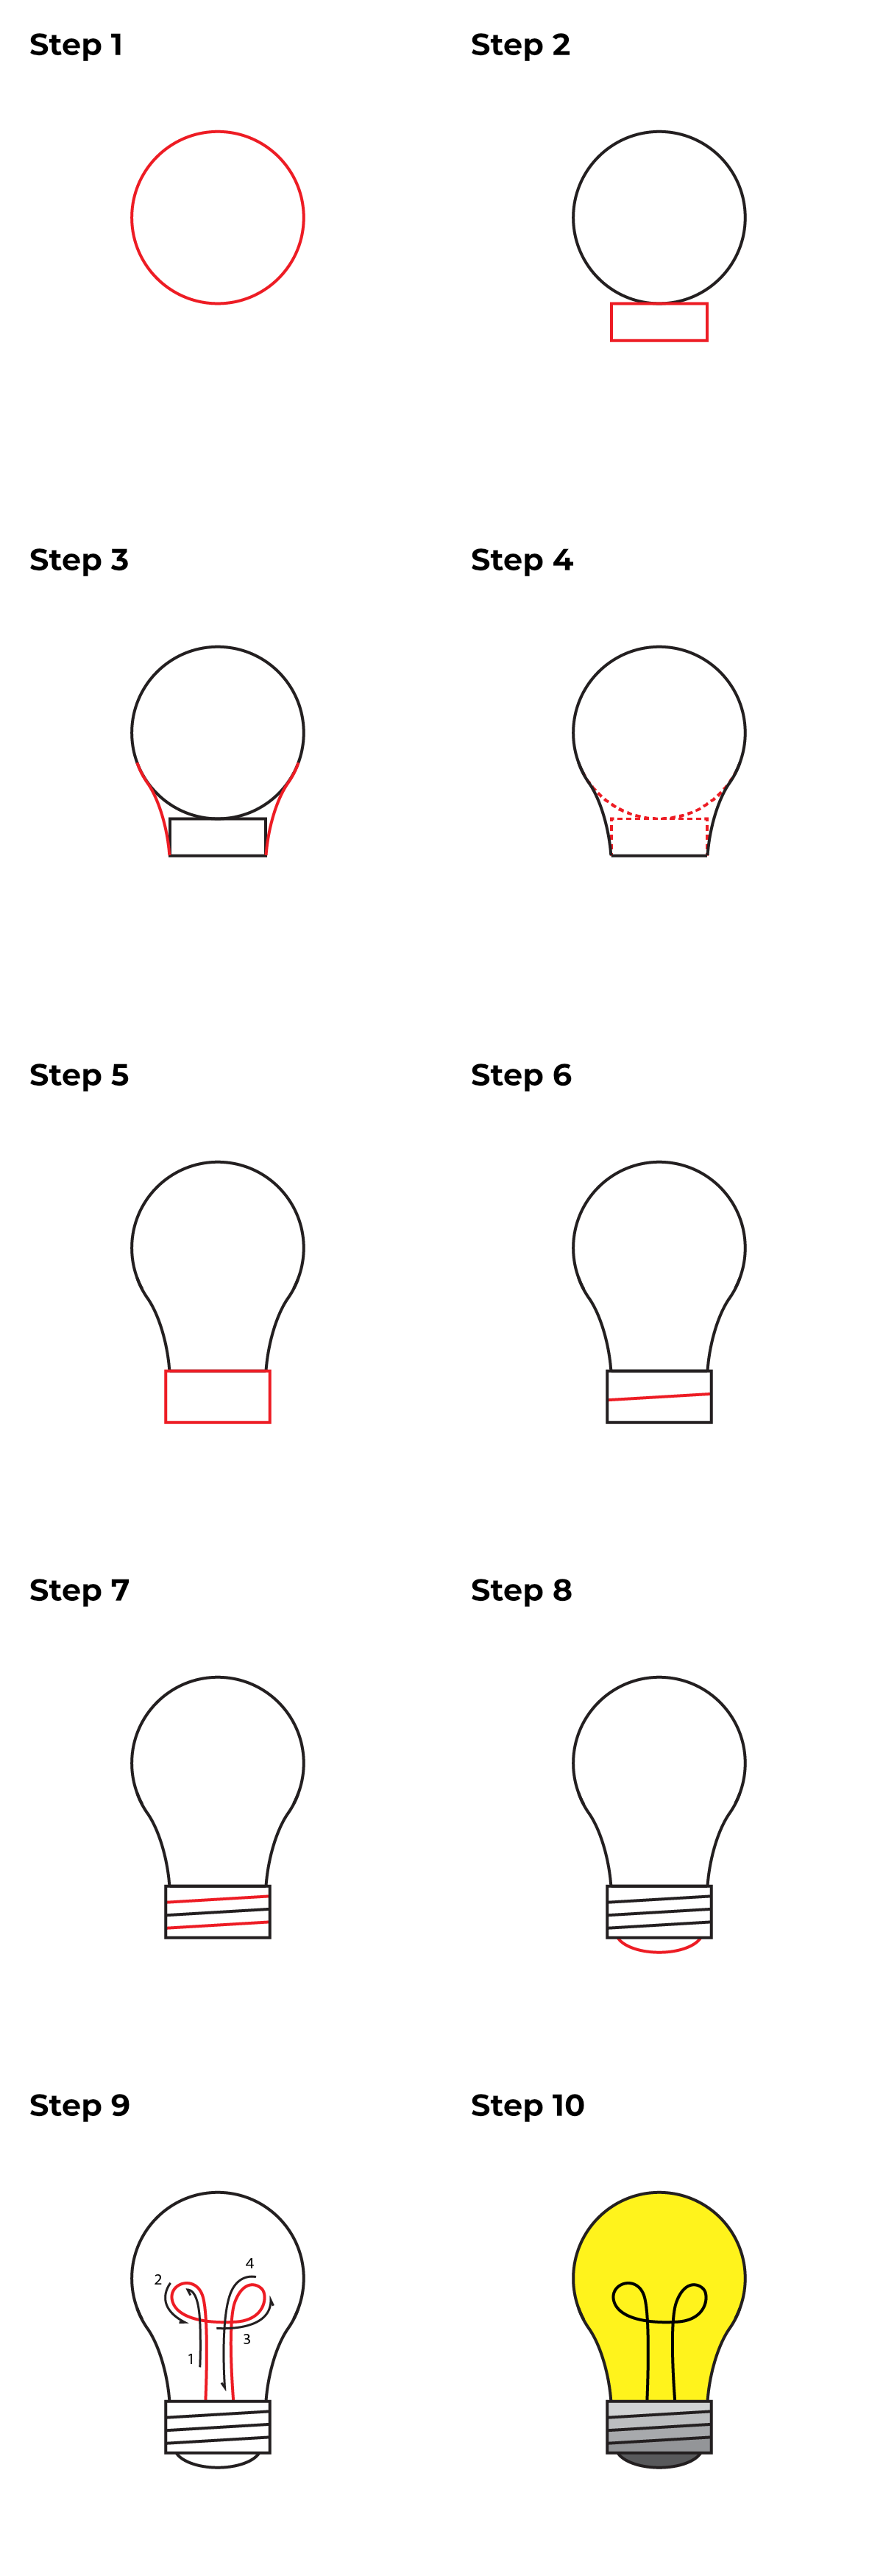 4 Light Bulb Base Types To Know About | Family Handyman